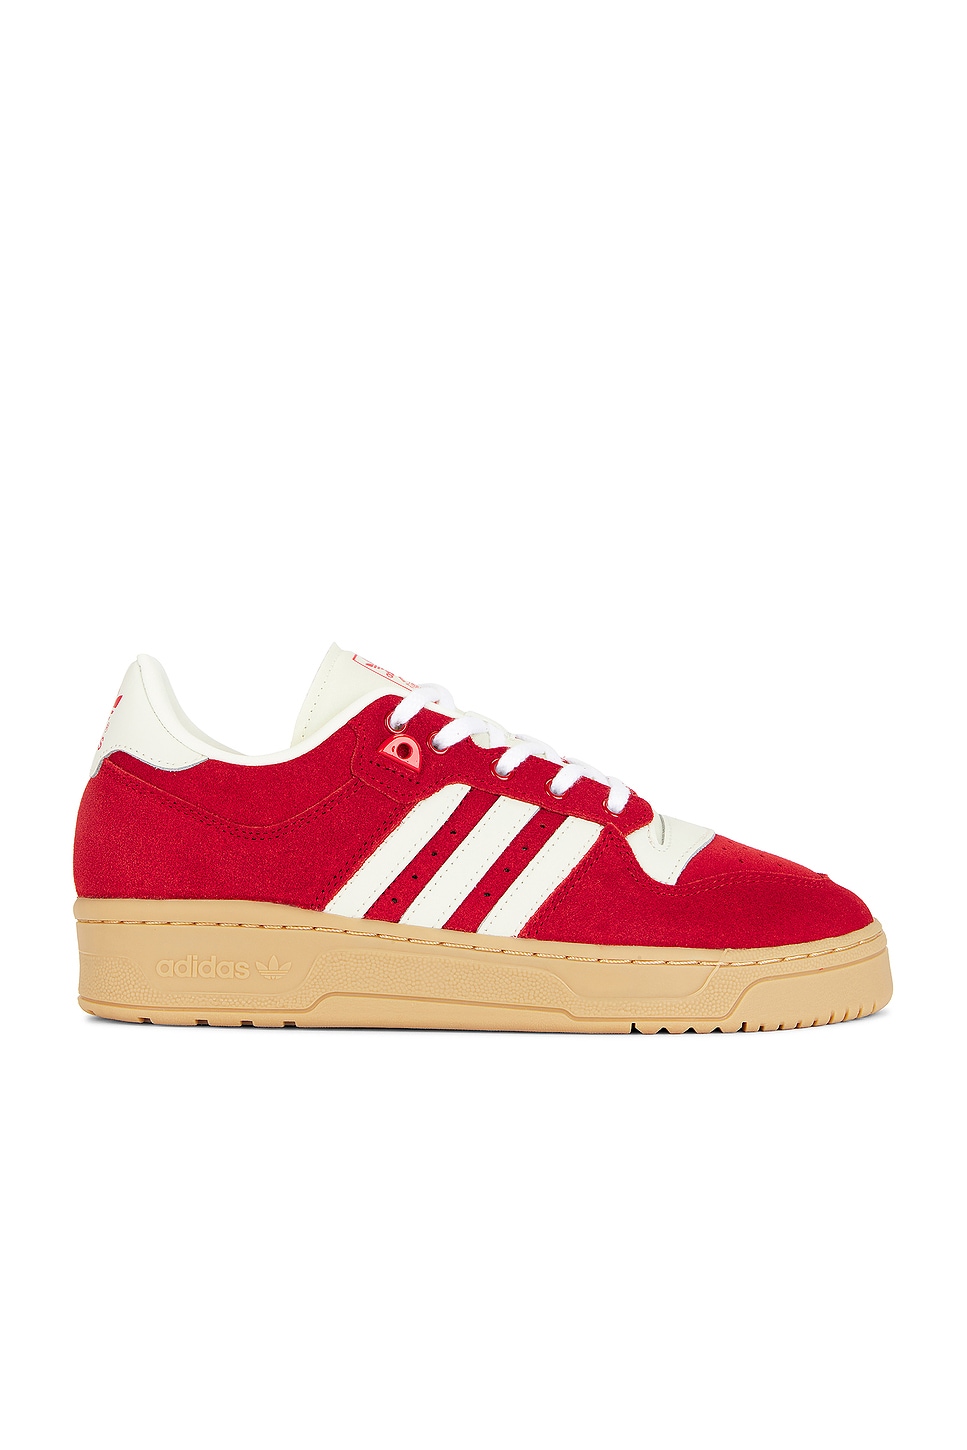 Image 1 of adidas Originals Rivalry 86 Low Sneaker in Better Scarlet, Ivory, & Gum